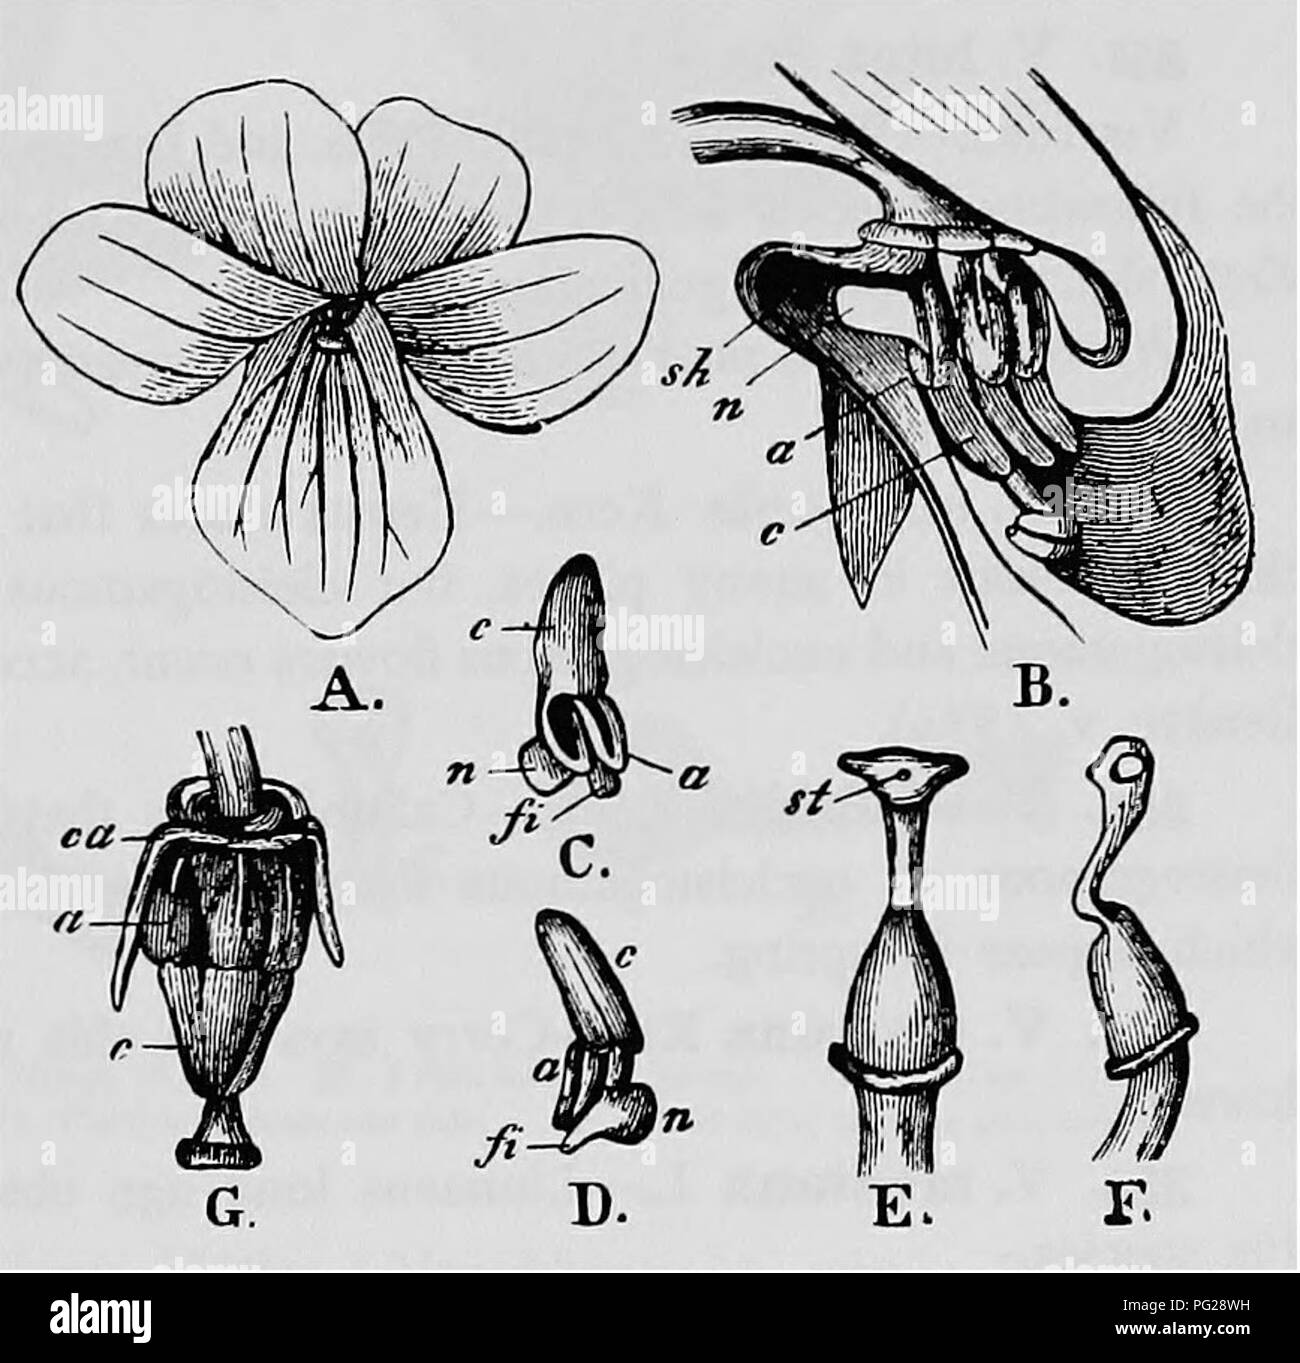 . Handbook of flower pollination : based upon Hermann Mu?ller's work 'The fertilisation of flowers by insects' . Fertilization of plants. VIOLARIEAE 139 MacLeod noticed 3 humble-bees, Anthophora, an ant, and a beetle in Flanders (Bot. Jaarb. Dodonaea, Ghent, vi, 1894, p. 223). Burkill ('Fertlsn. of Spring Fls.') observed the following on the Yorkshire coast.— A. Diptera. Muscidae: i. Cephalia nigripes Mg., skg. B. Hymenoptera. Apidae: 2. Bombus terrester L., skg. In Dumfriesshire 2 humble-bees, an Empid, and a hover-fly have been recorded (Scott-Elliot, 'Flora of Dumfriesshire,' p. 21). 348. V Stock Photo